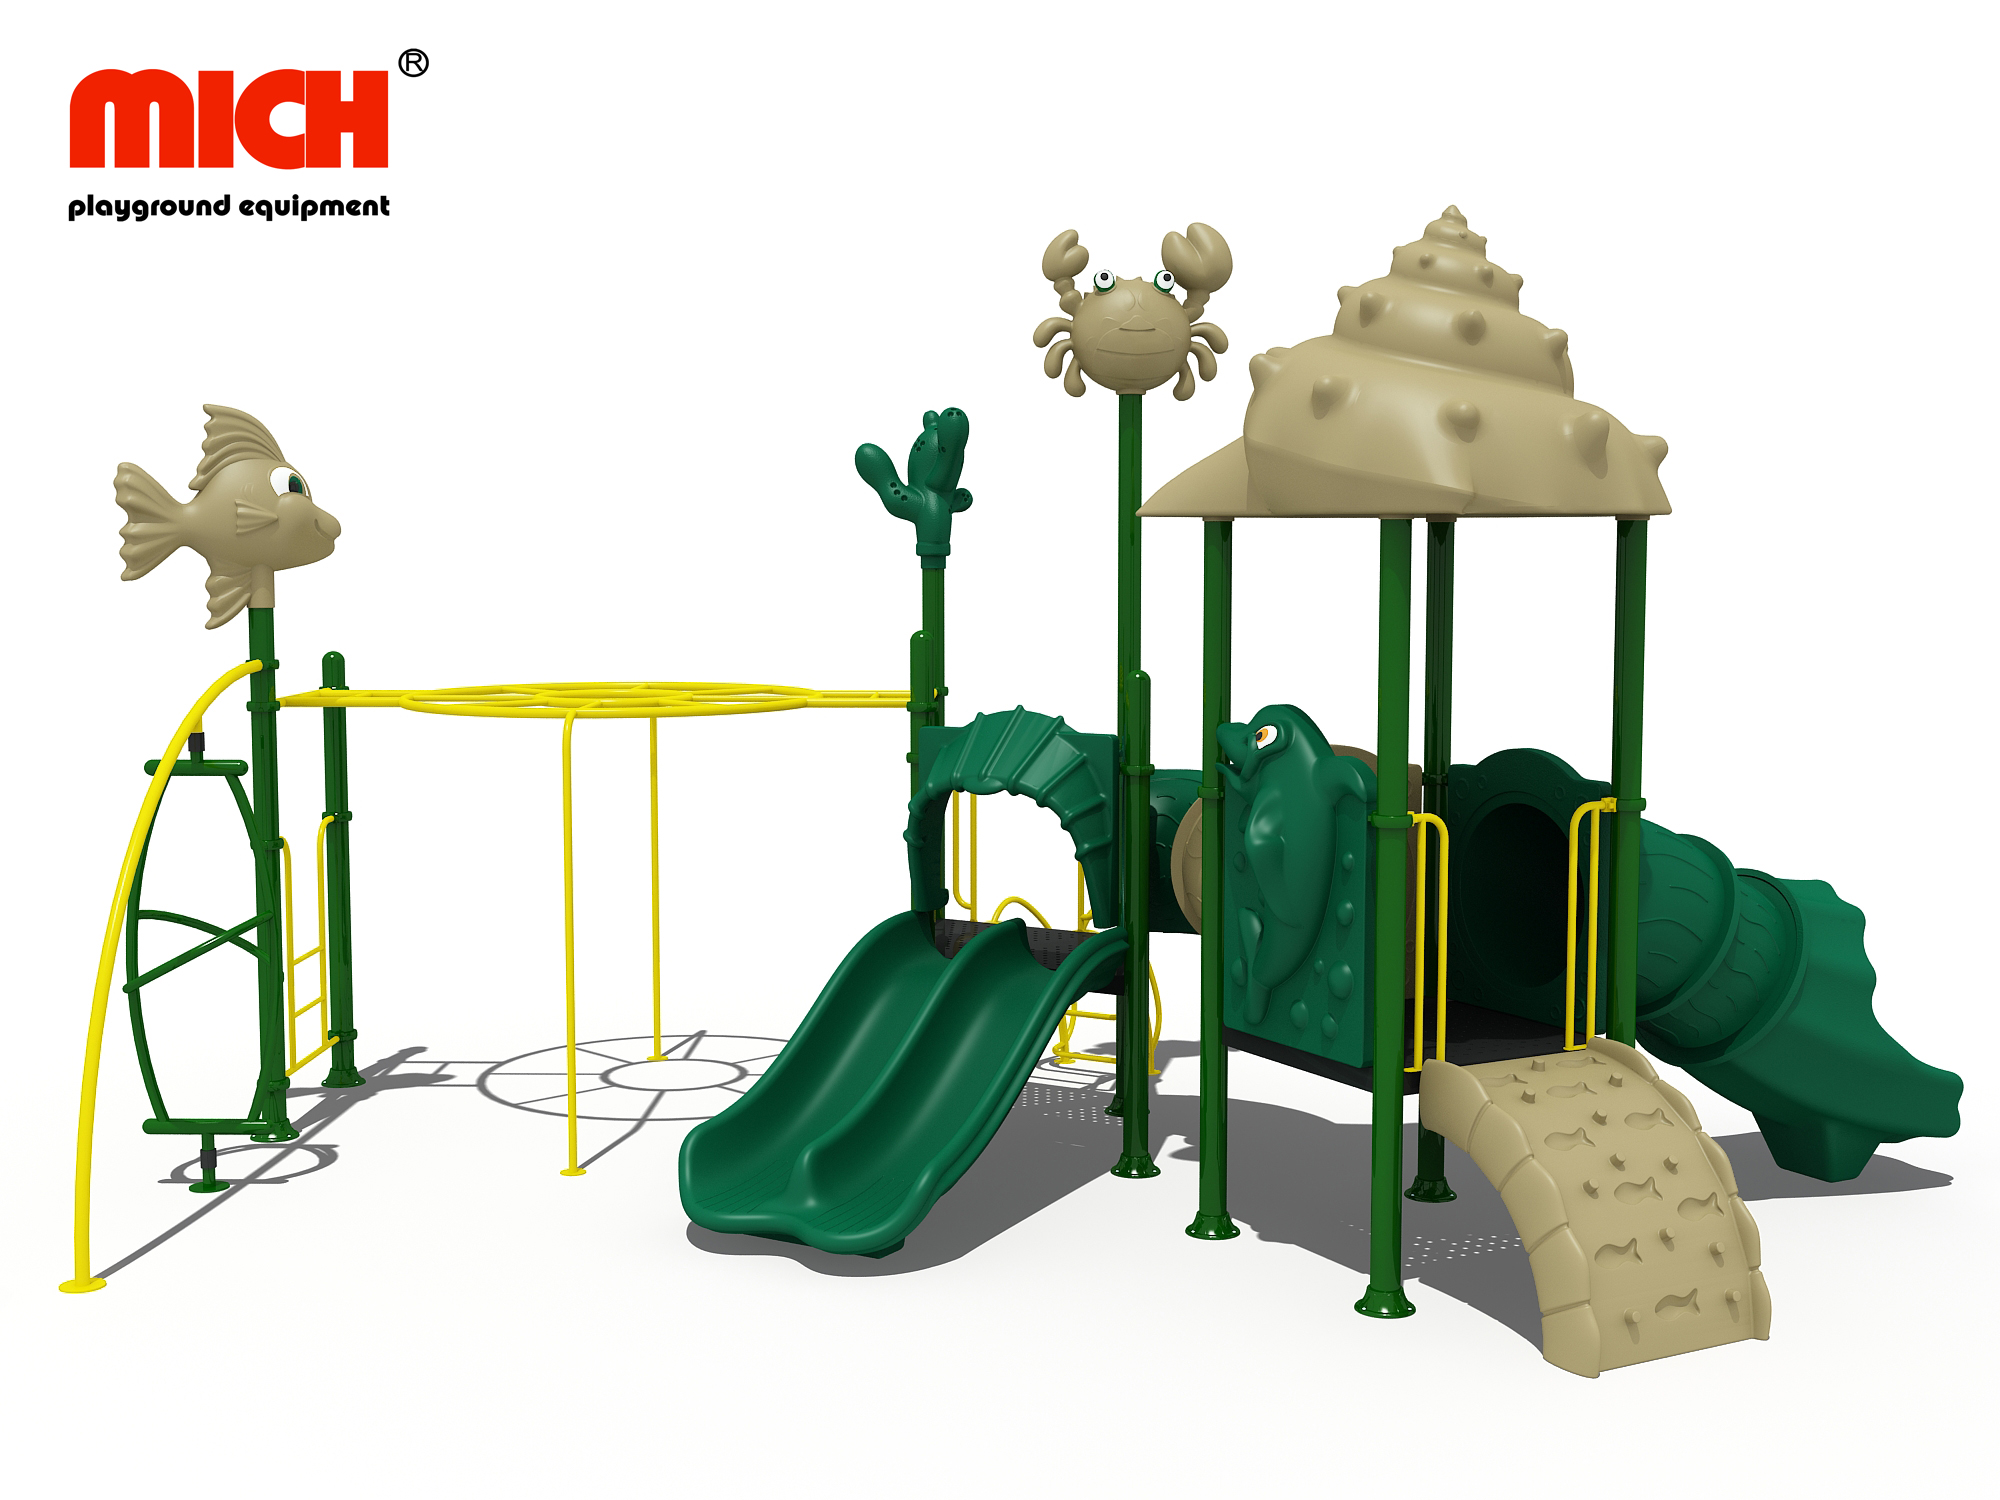 How to find the right outdoor playground equipment?